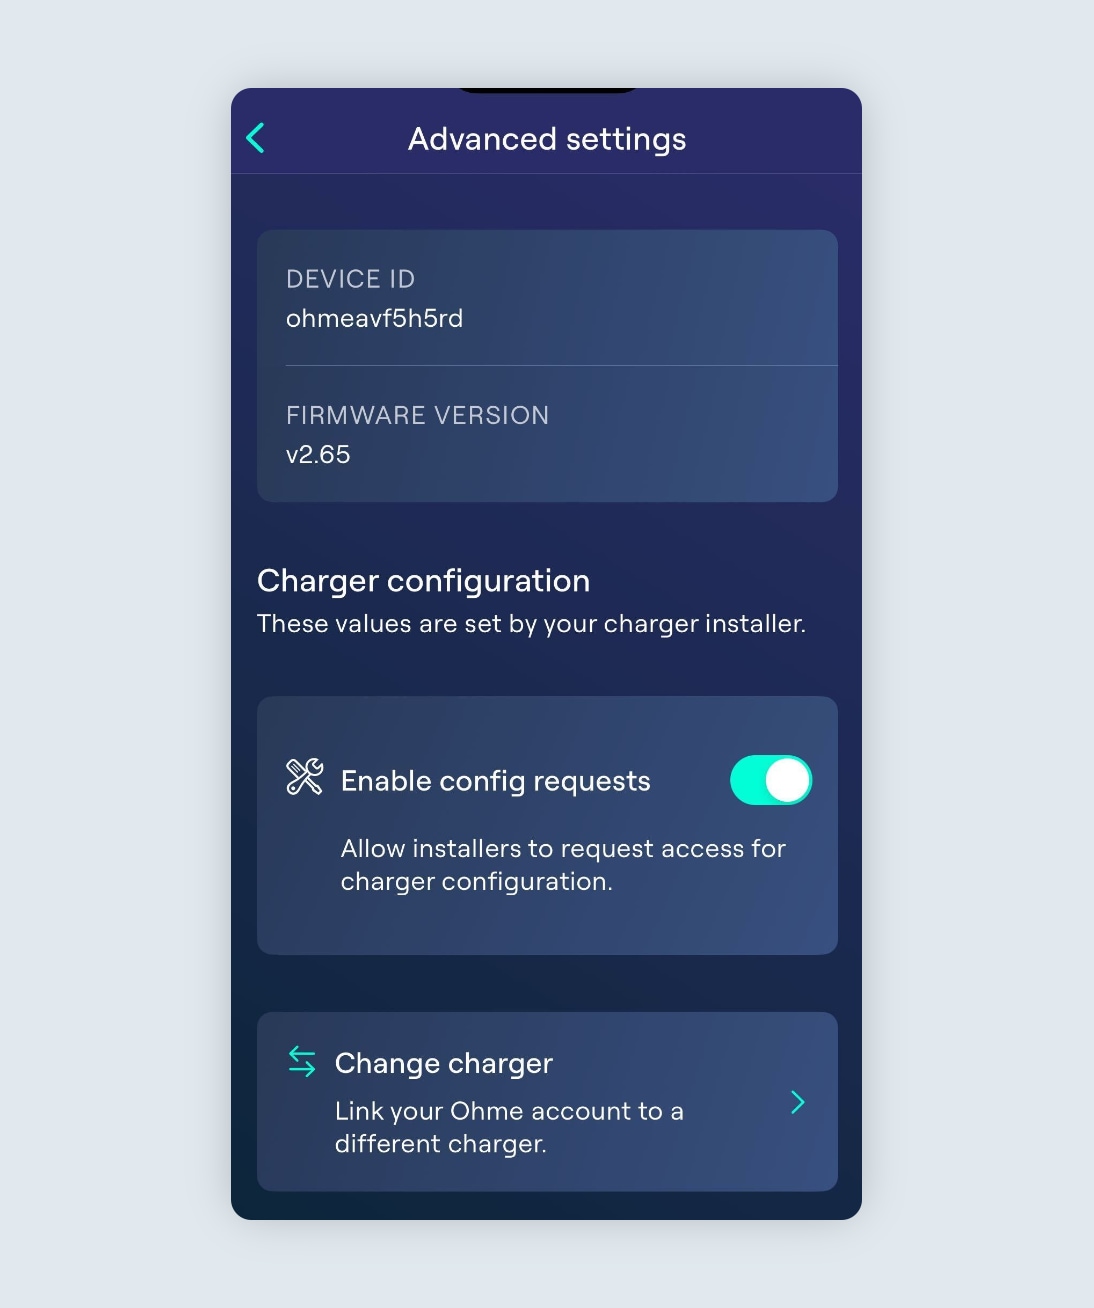 Advanced Settings screen showing 'Change charger' button